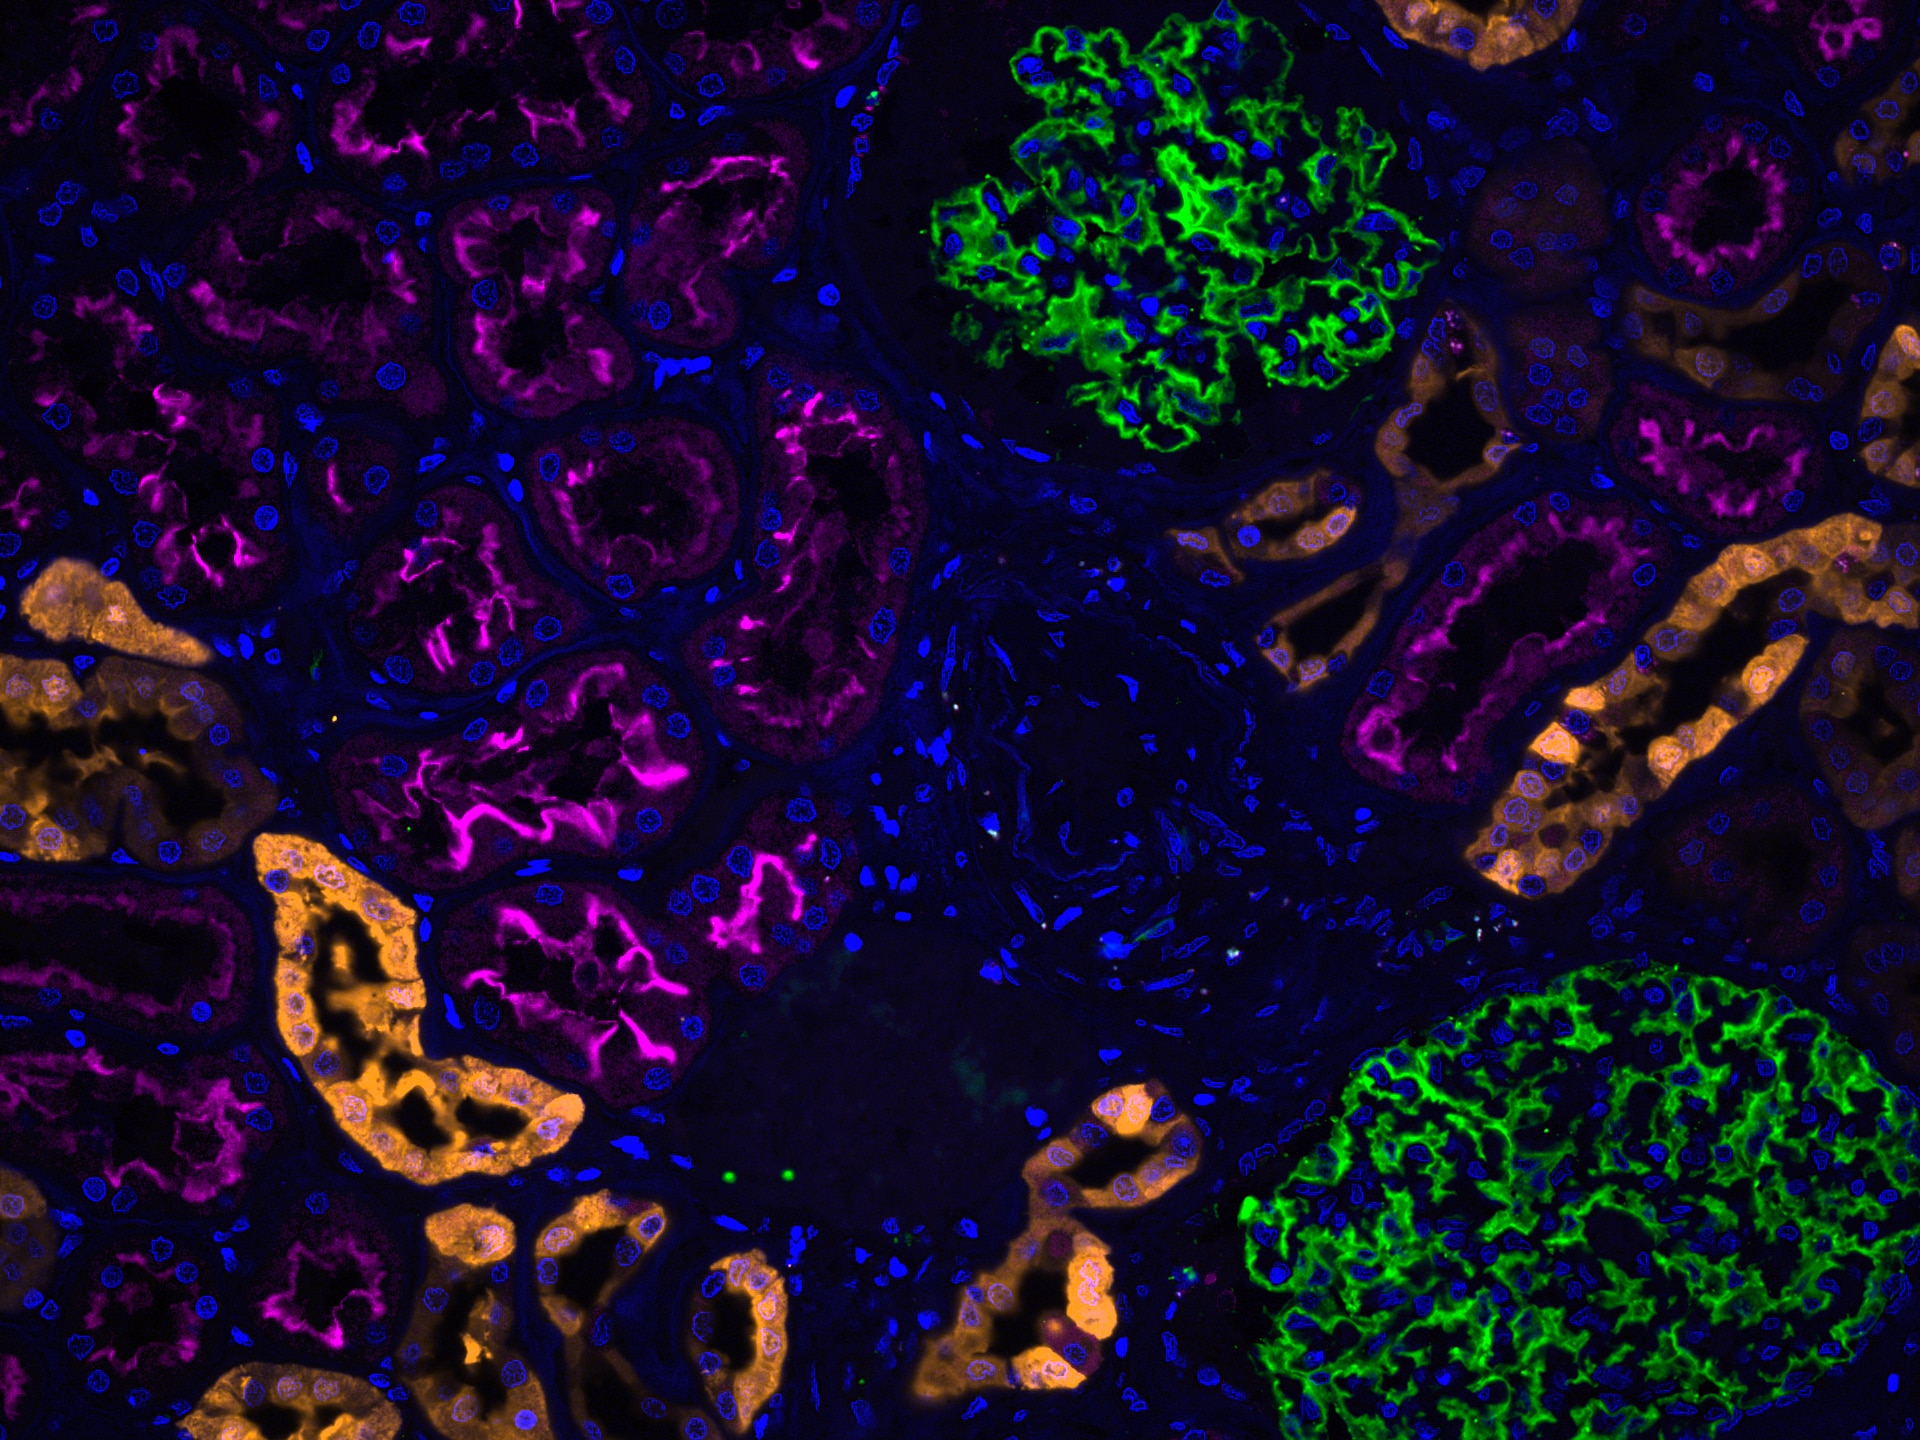 Immunofluorescence of human kidney: FFPE human kidney sections were stained with anti-Calbindin antibody (14479-1-AP) labeled with FlexAble CoraLite® Plus 555 Kit (KFA002, yellow), anti-ACE2 antibody (66699-1-Ig) labeled with FlexAble CoraLite® Plus 647 Kit (KFA023, magenta), CoraLite®488-conjugated Podocalyxin antibody (CL488-18150, green) and DAPI (blue).